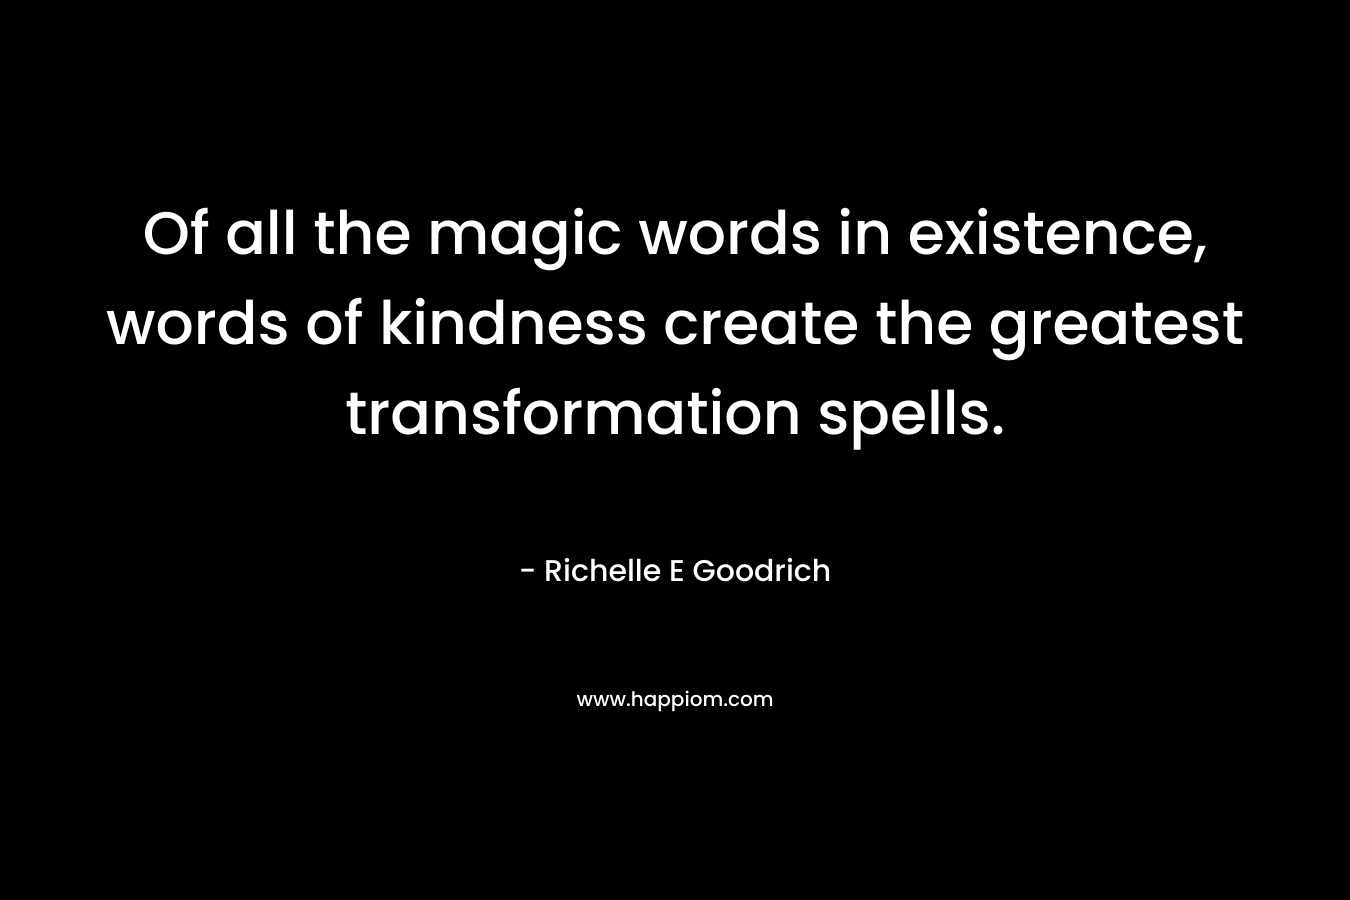 Of all the magic words in existence, words of kindness create the greatest transformation spells. – Richelle E Goodrich